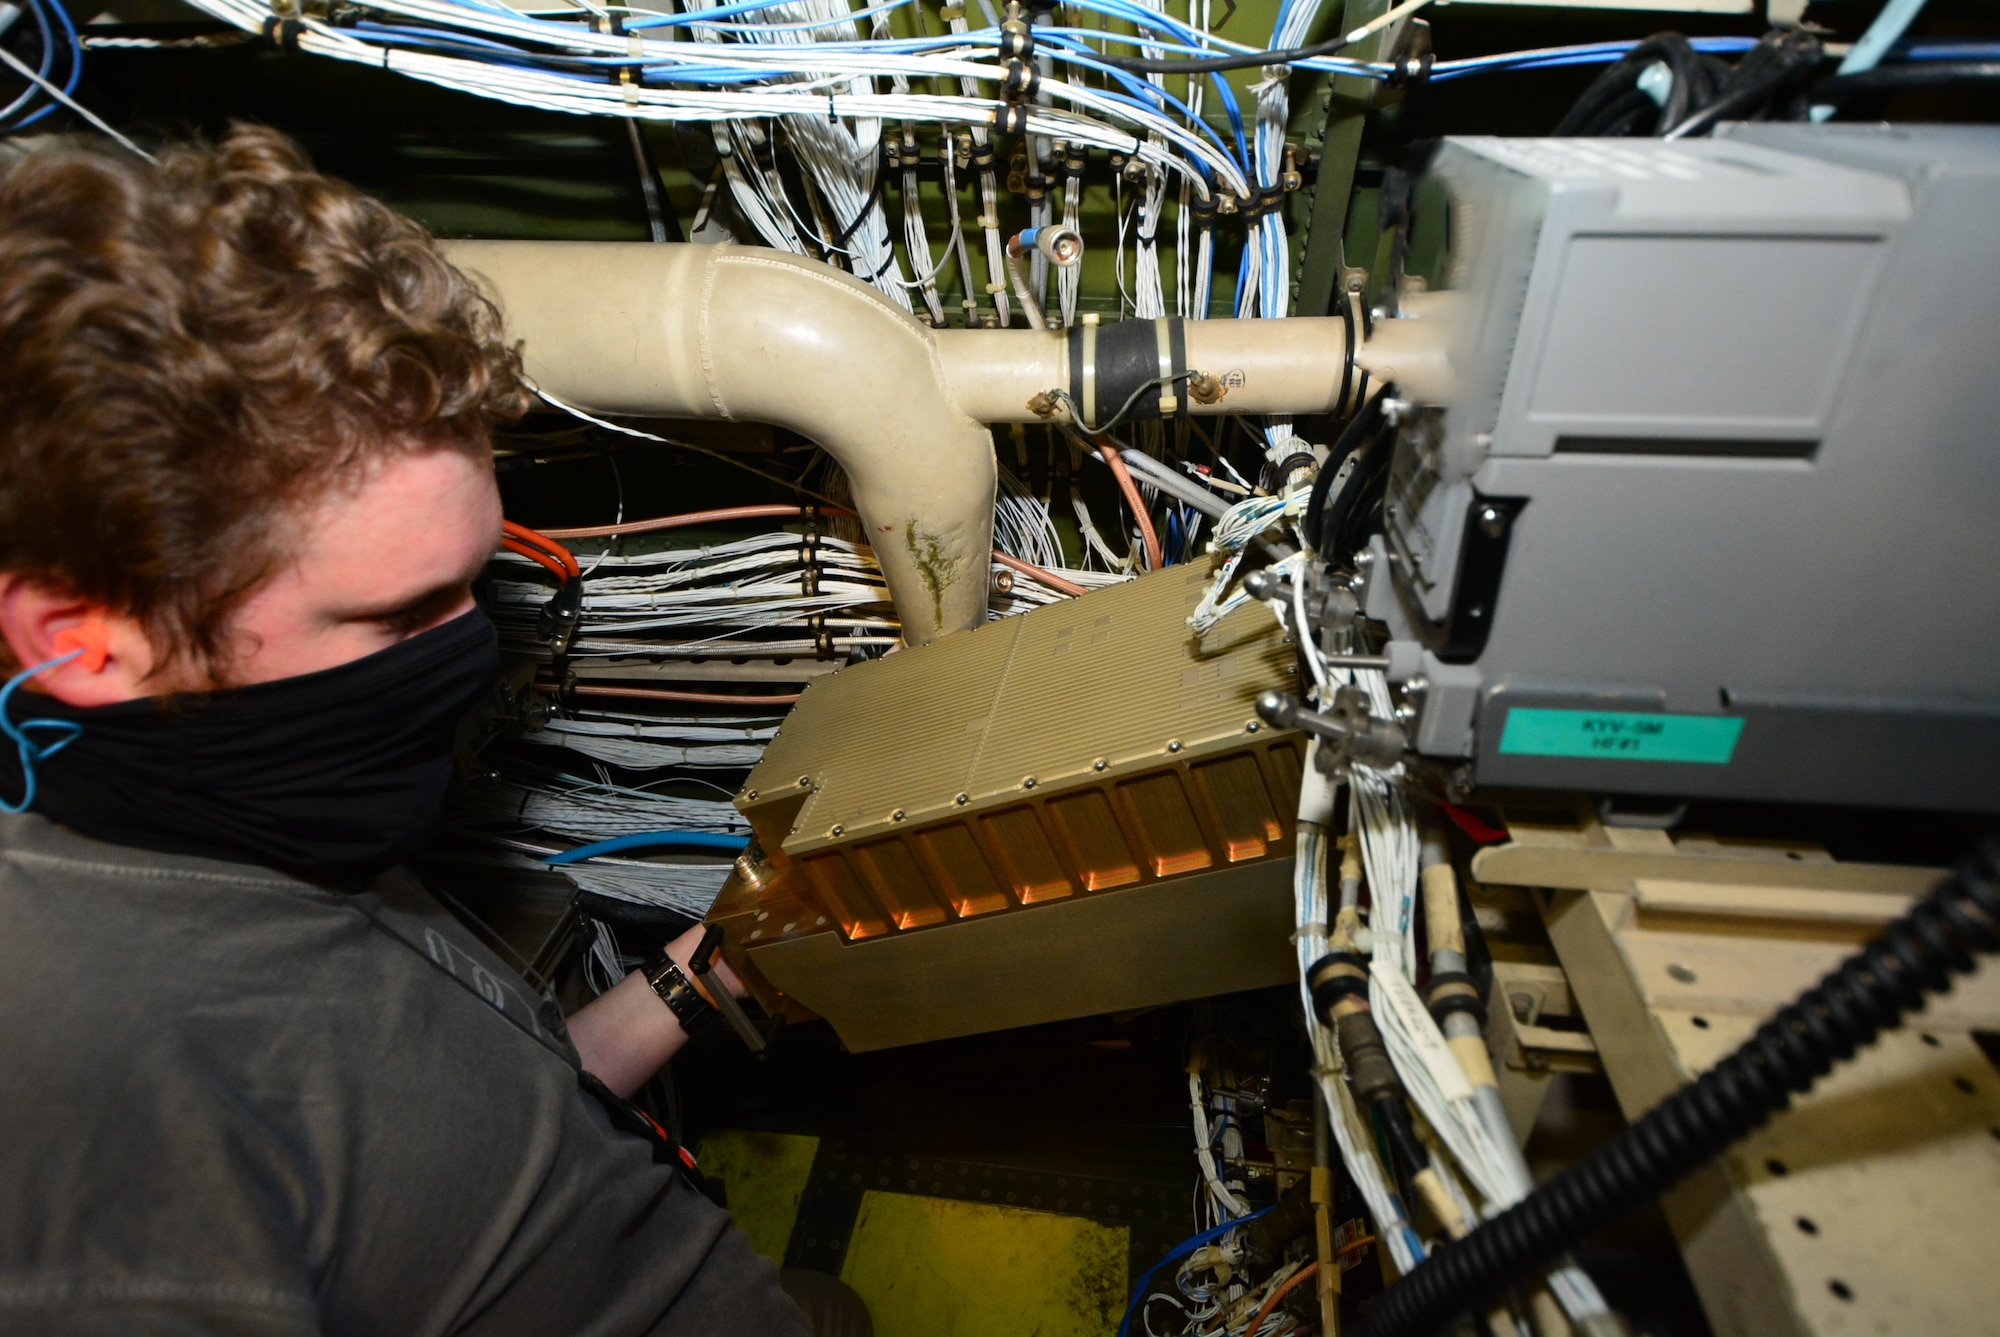 Photo shows man installing hardware surrounded by equipment and wires.